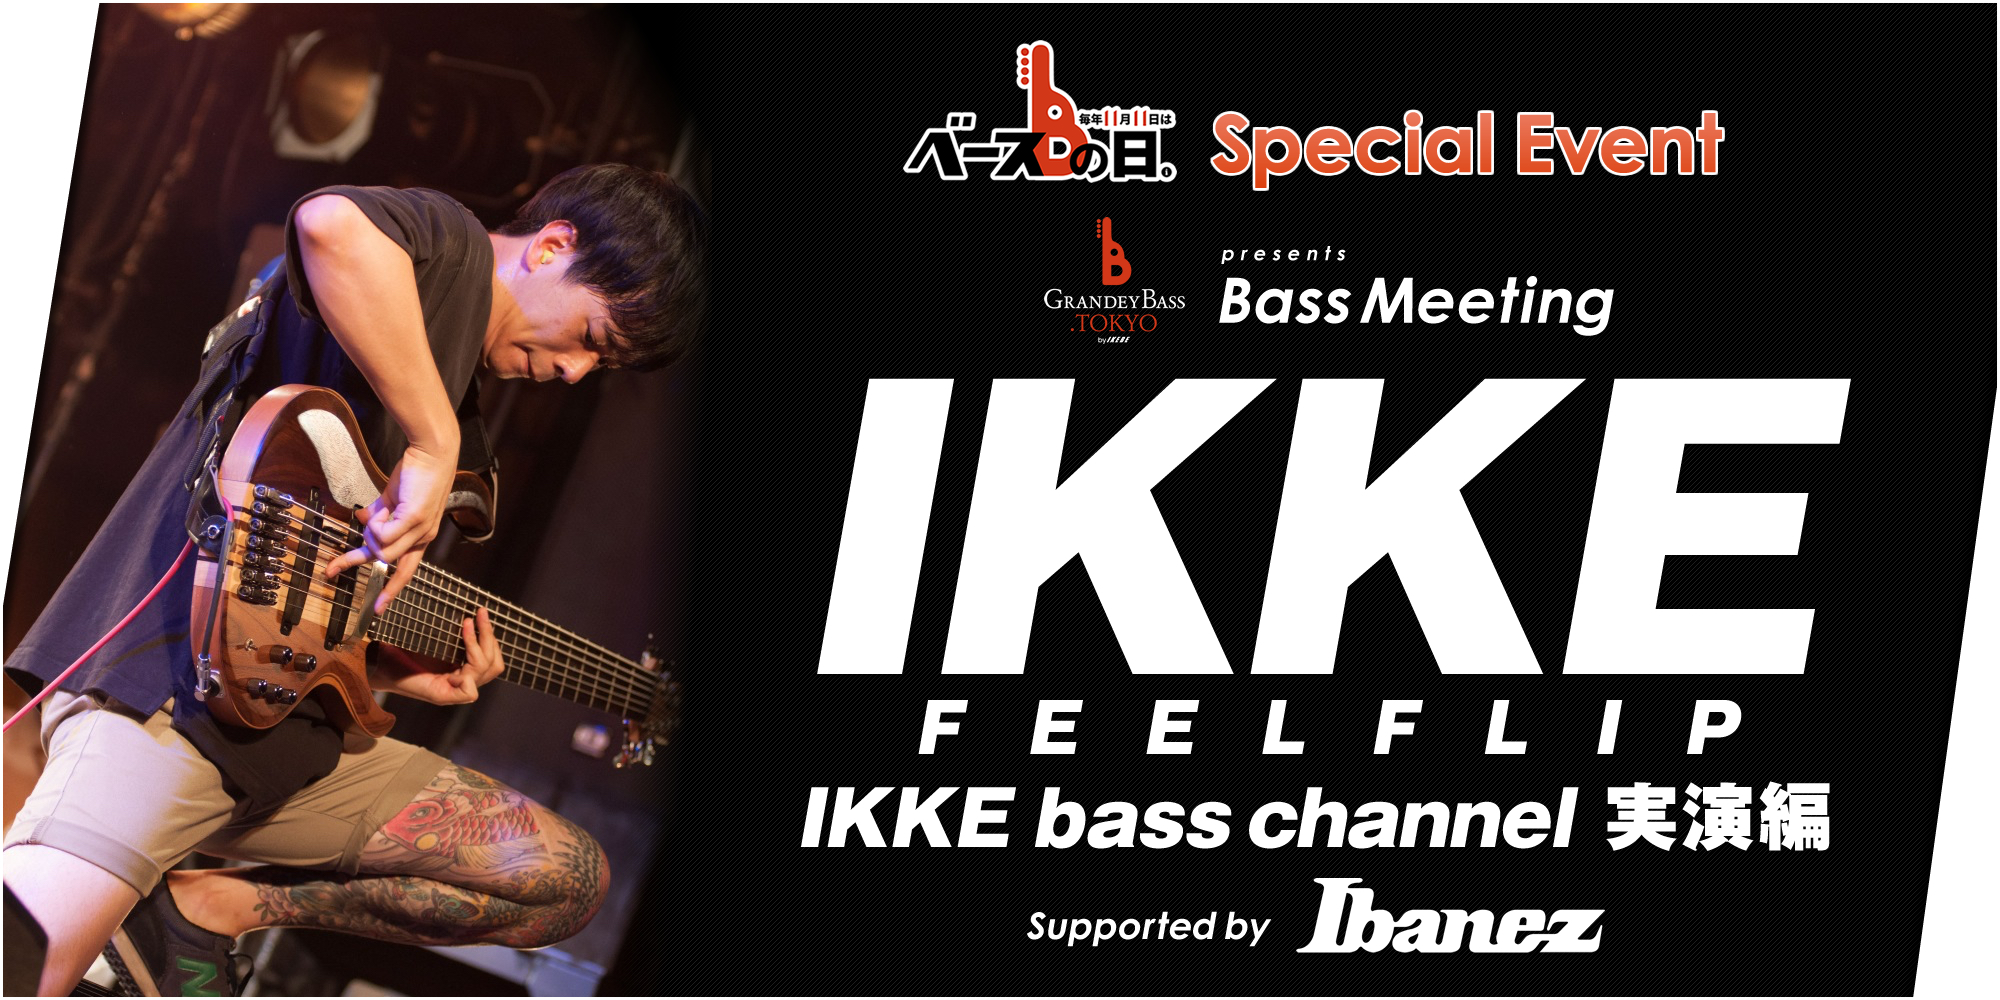 GRANDEY BASS TOKYO Presents Bass Meeting IKKE（FEELFLIP） 『IKKE bass channel 実演編』 Supported by Ibanez